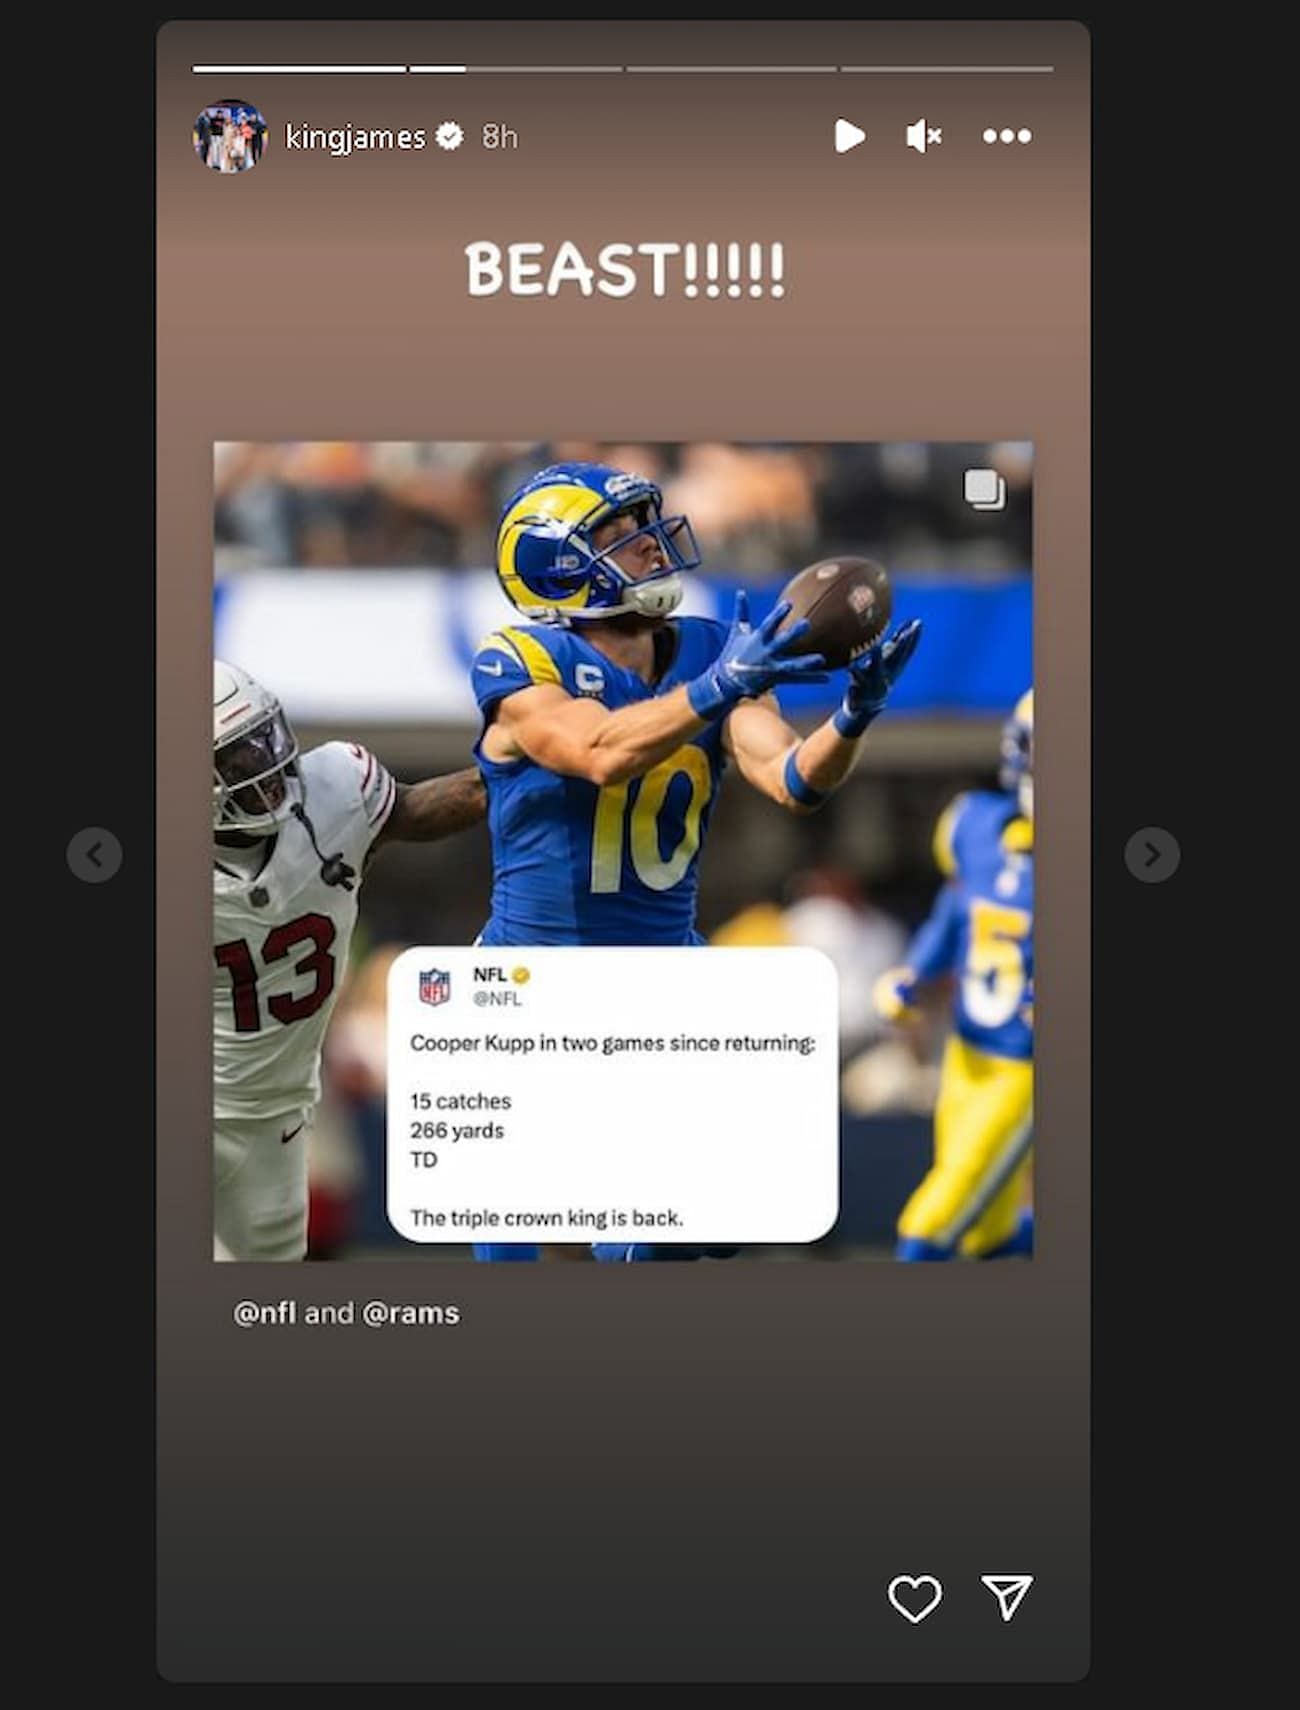 LeBron posted this Instagram story applauding Cooper Kupp